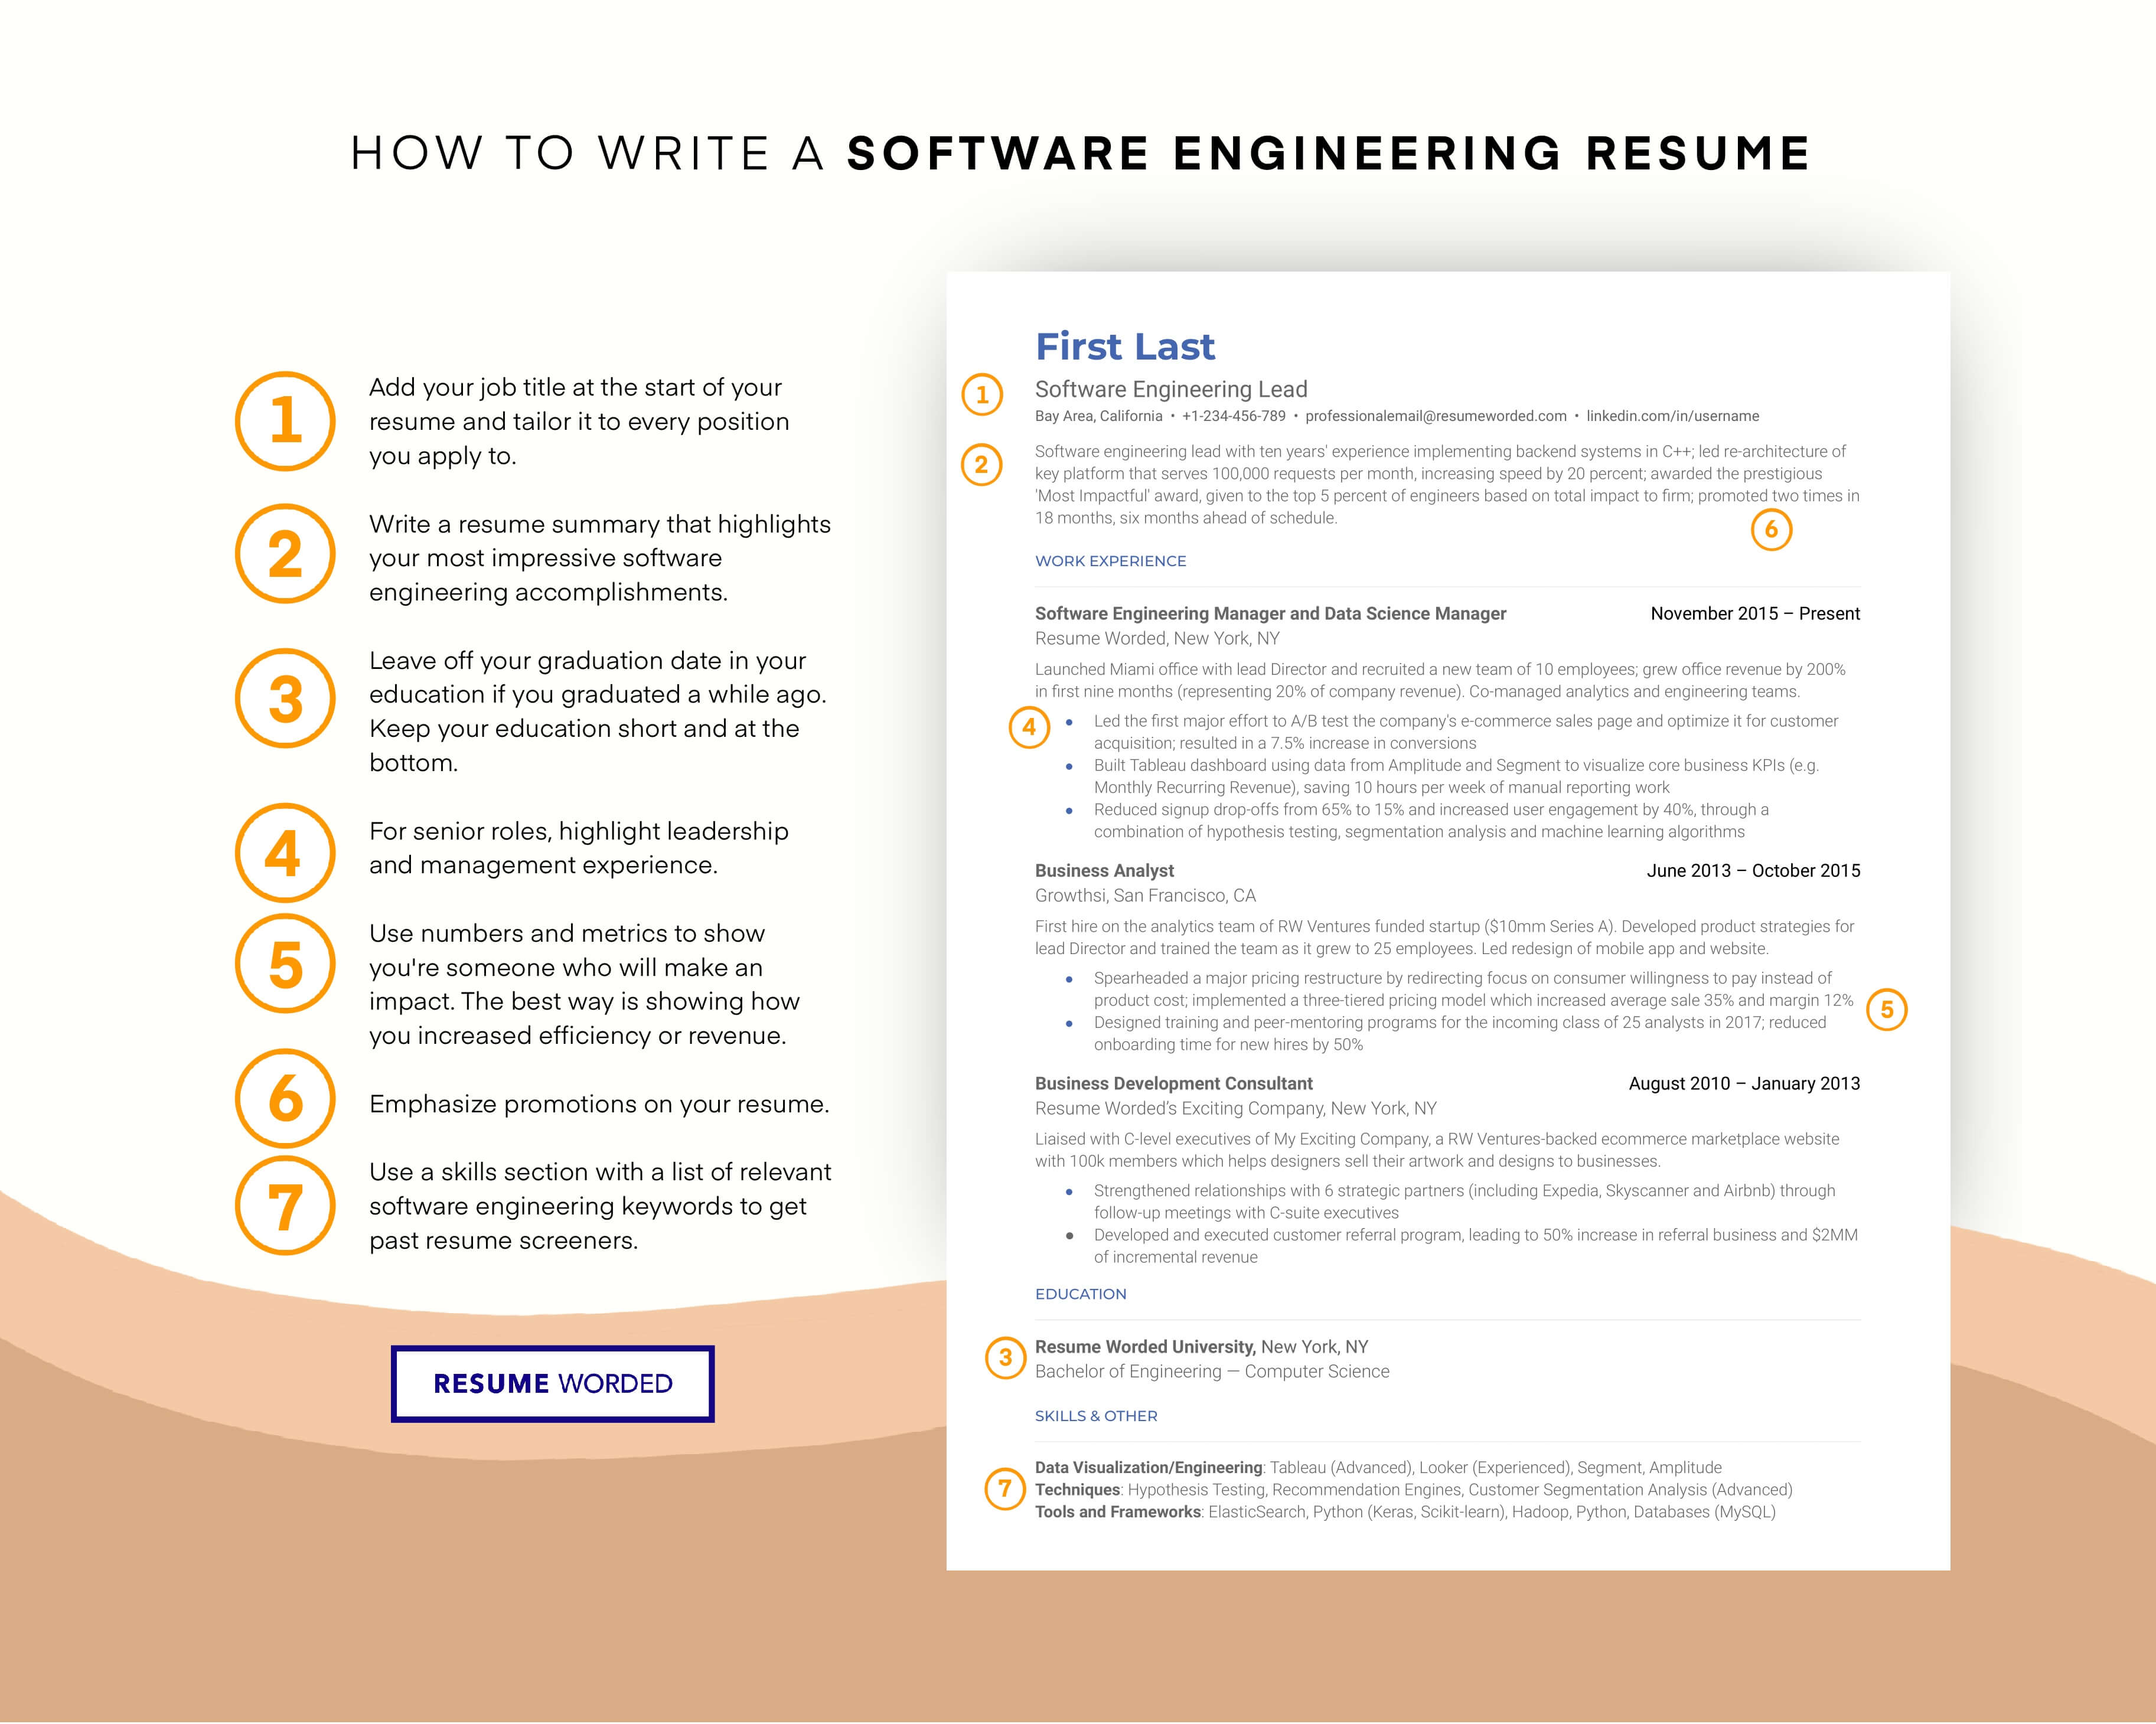 Showcase software proficiency and certifications - Data Entry Resume